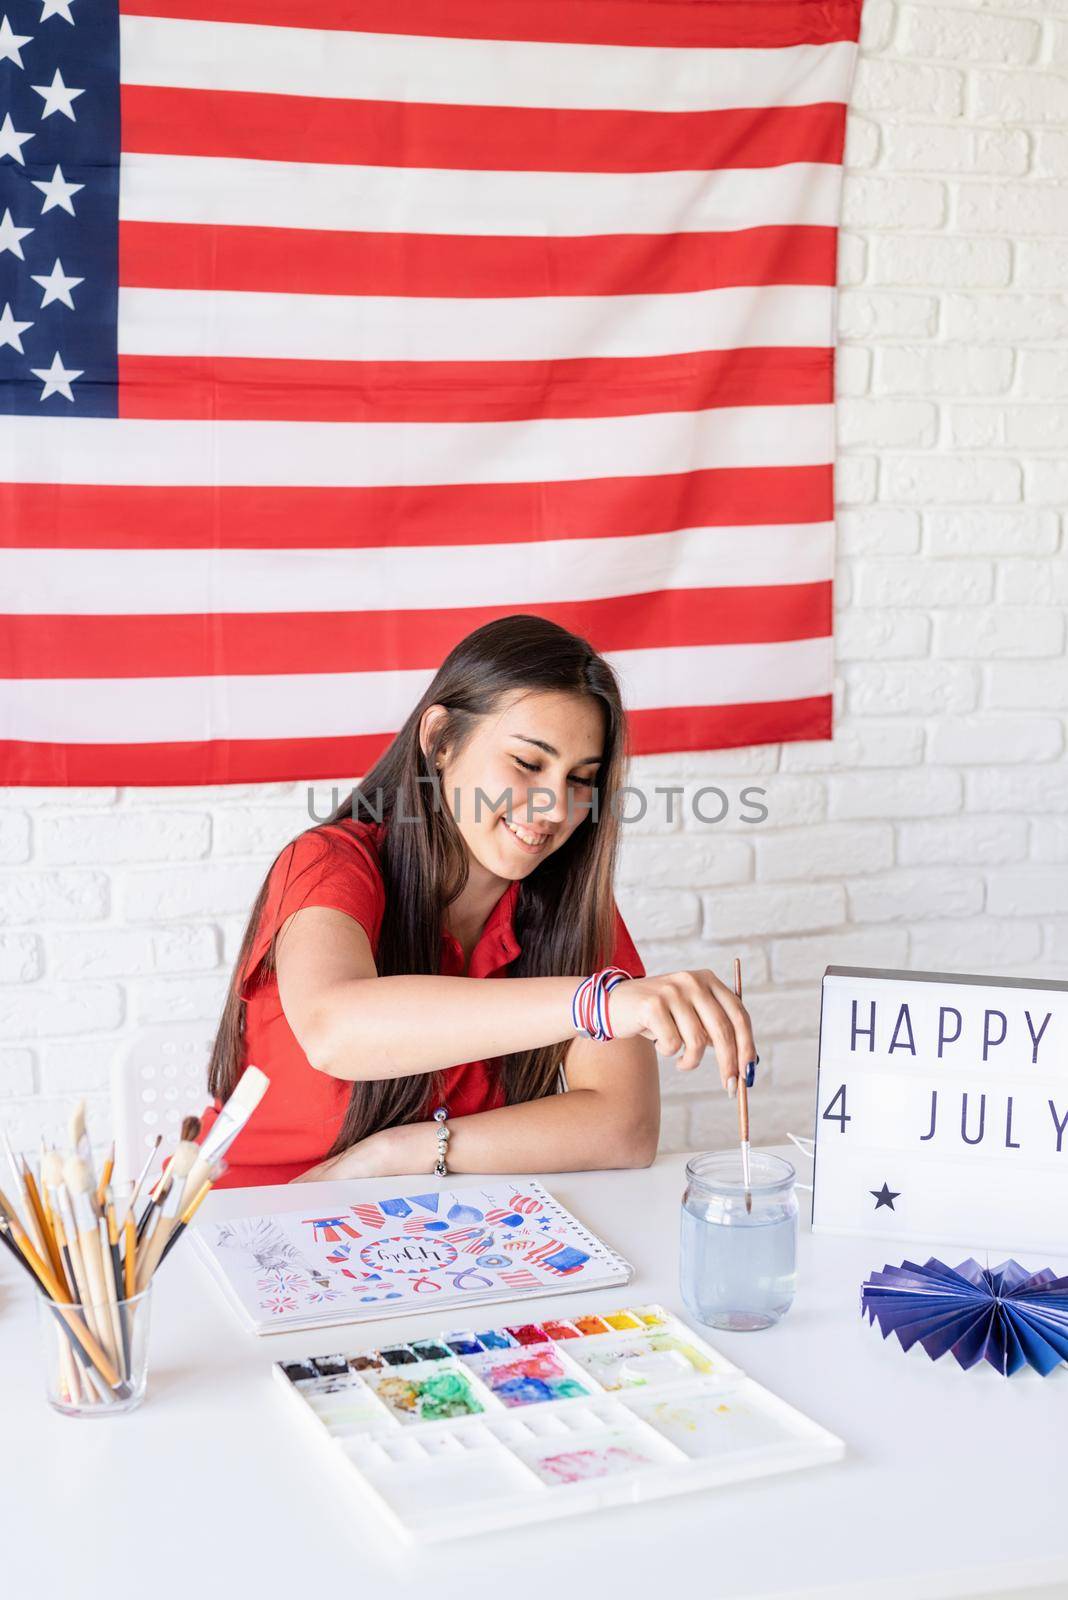 Independence day of the USA. Happy July 4th. Beautiful woman drawing a watercolor illustration for Independence day of the USA. Happy 4 July the text on the lightbox